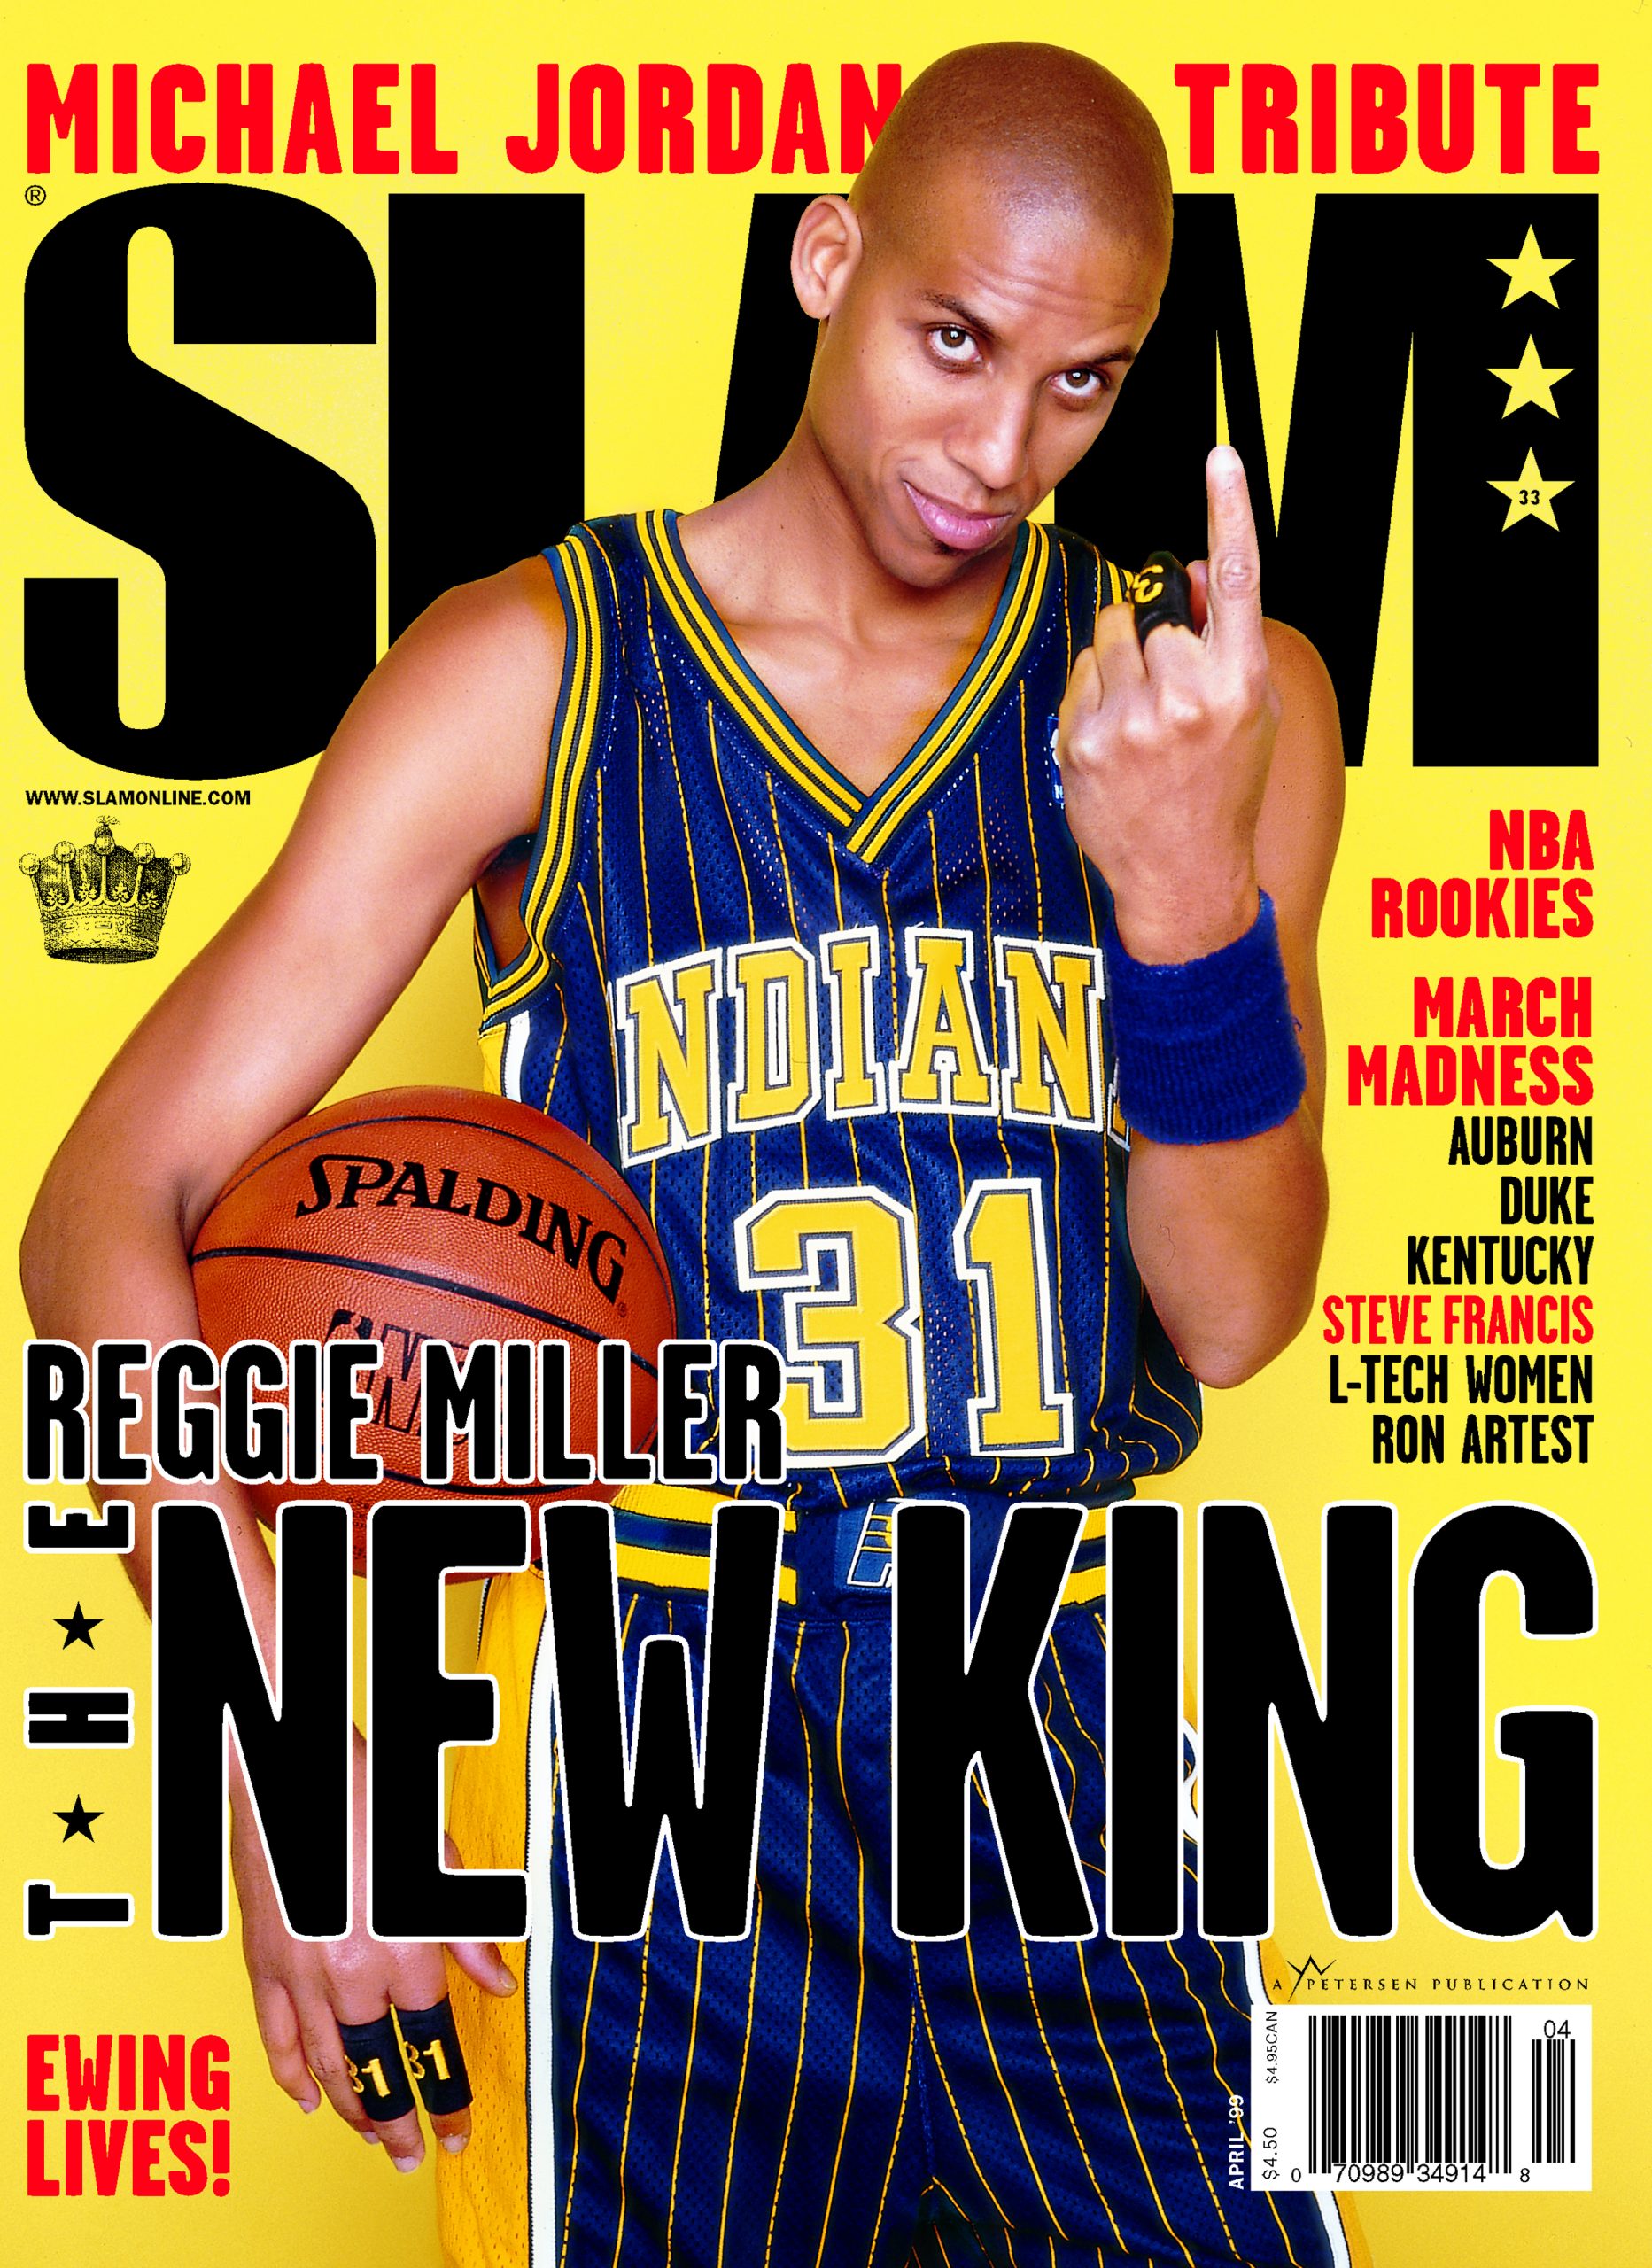 THE 30 PLAYERS WHO DEFINED SLAM’S 30 YEARS: Reggie Miller